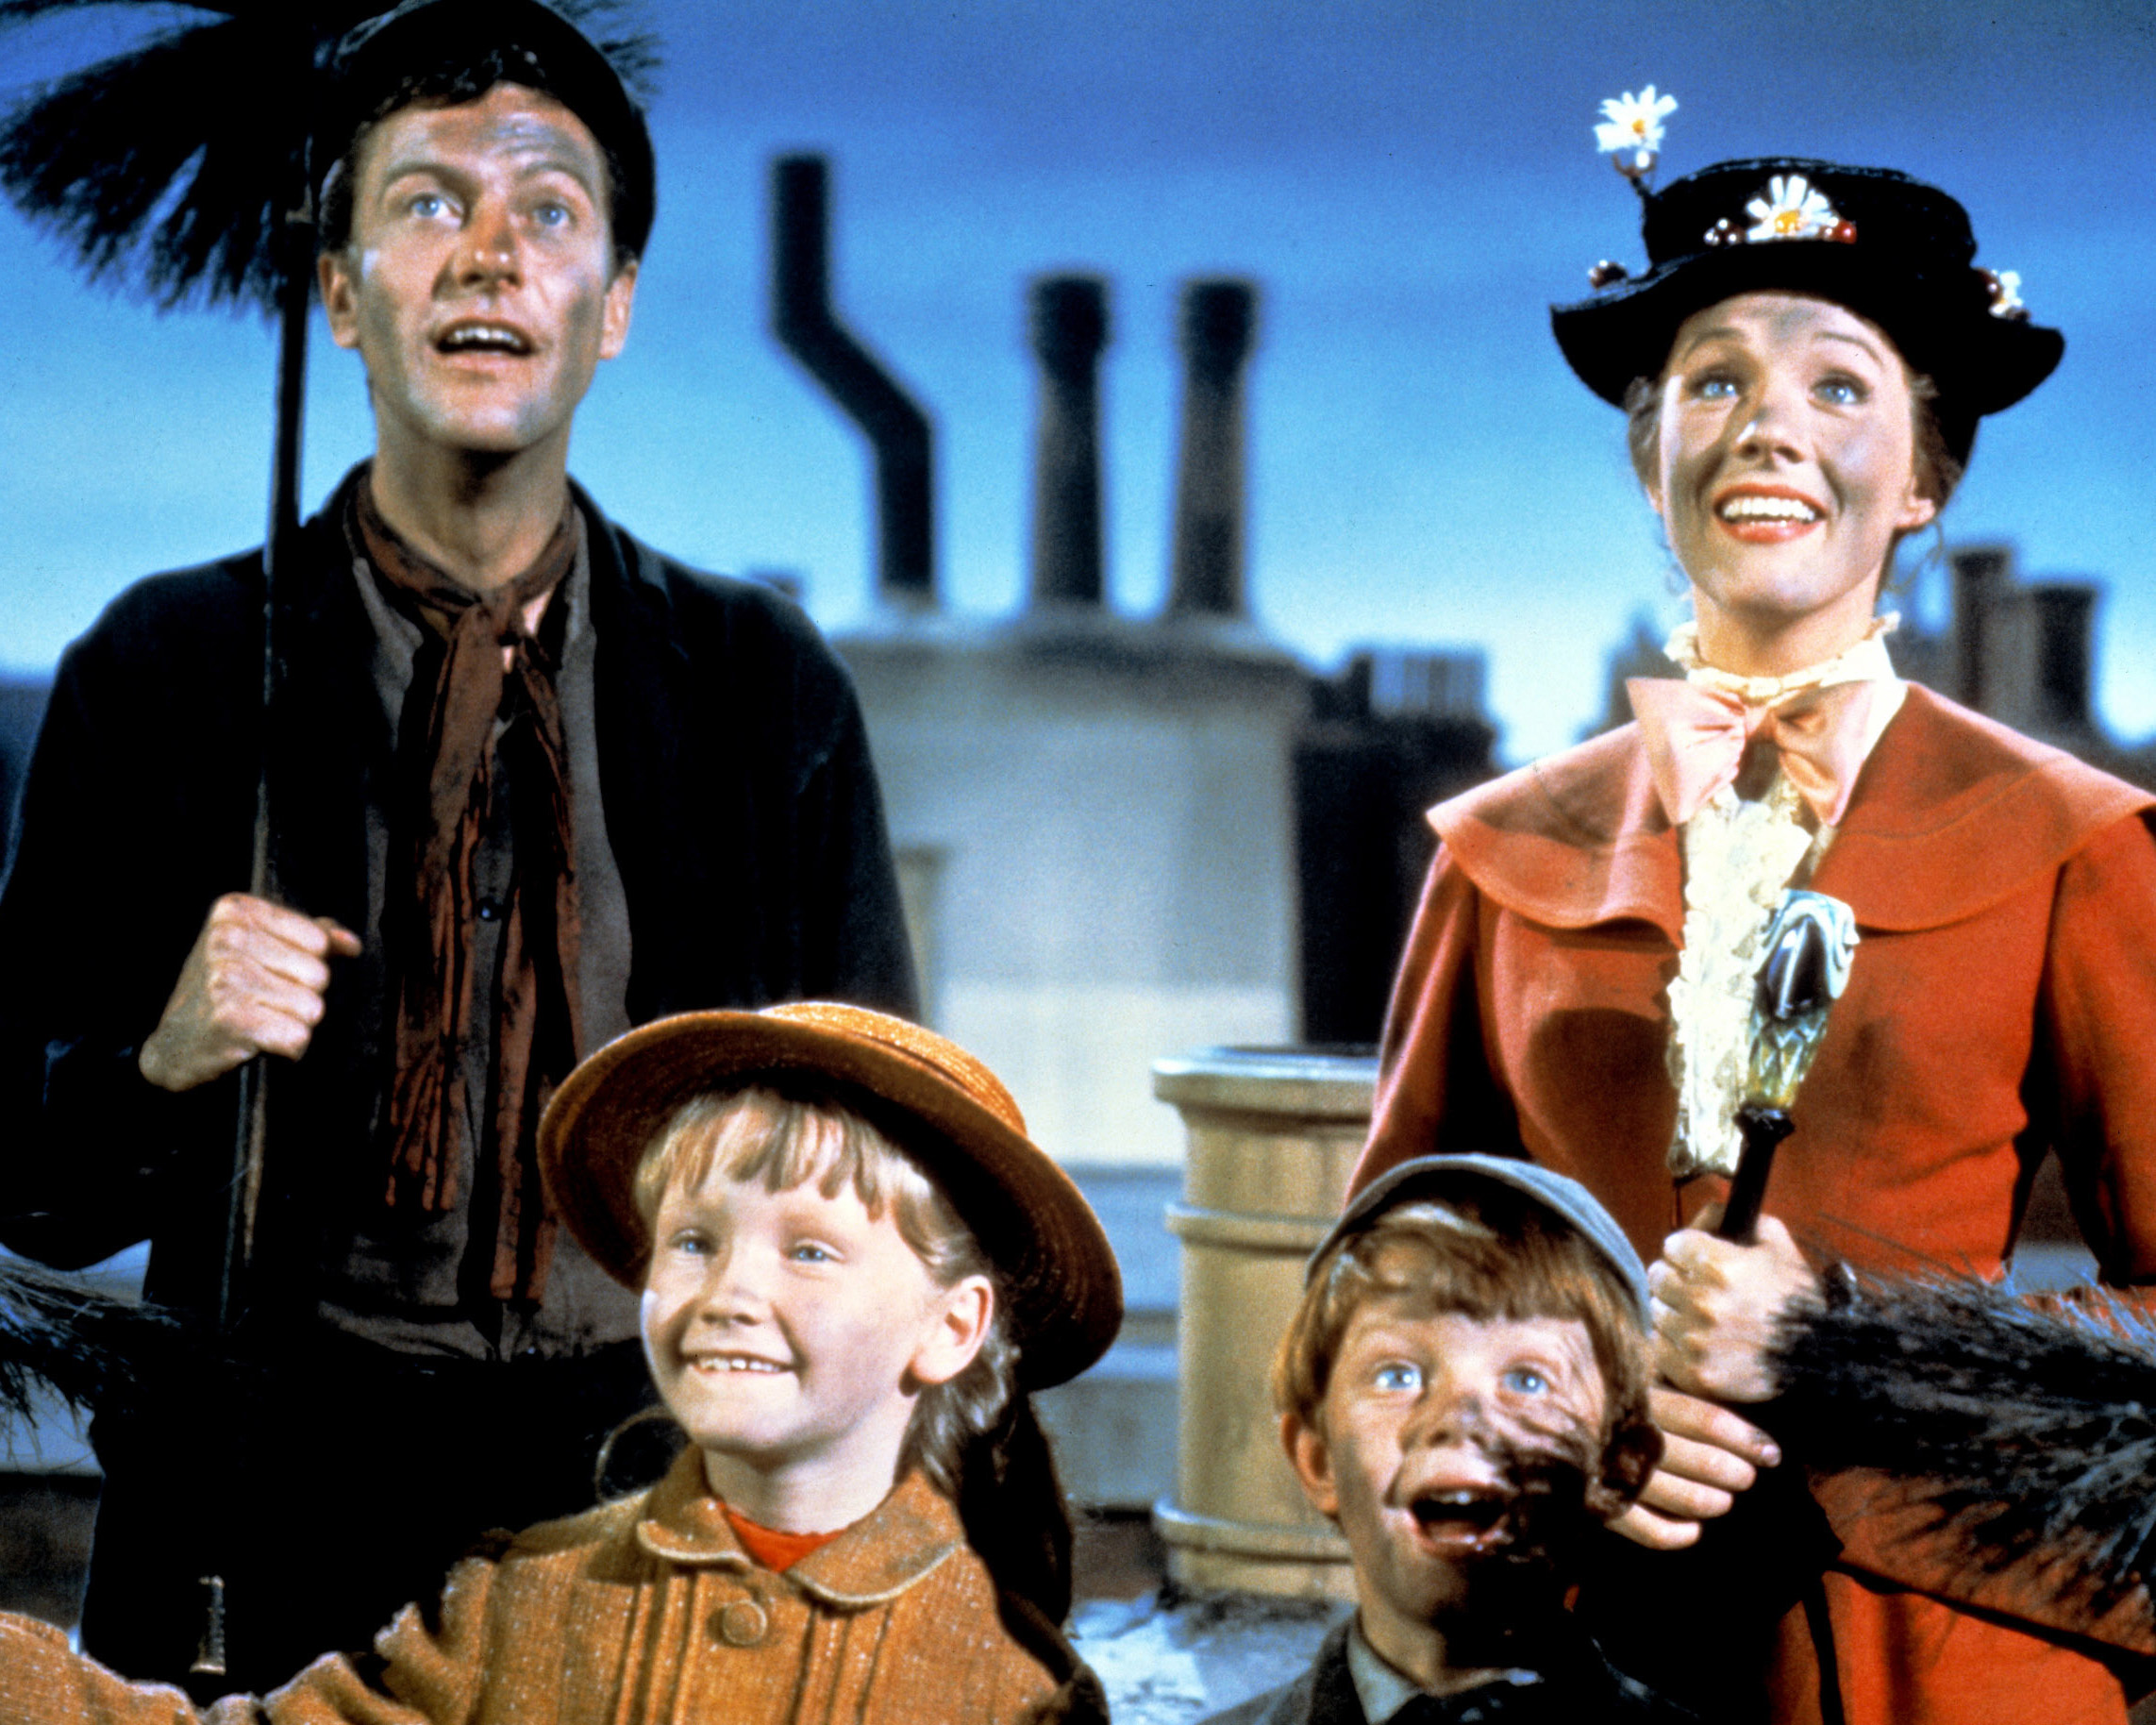 Dick Van Dyke as Bert, Julie Andrews as Mary Poppins, Karen Dotrice as Jane Banks and Matthew Garber as Michael Banks in the Disney musical 'Mary Poppins.' (Silver Screen Collection&mdash;Hulton Archive/Getty Images)